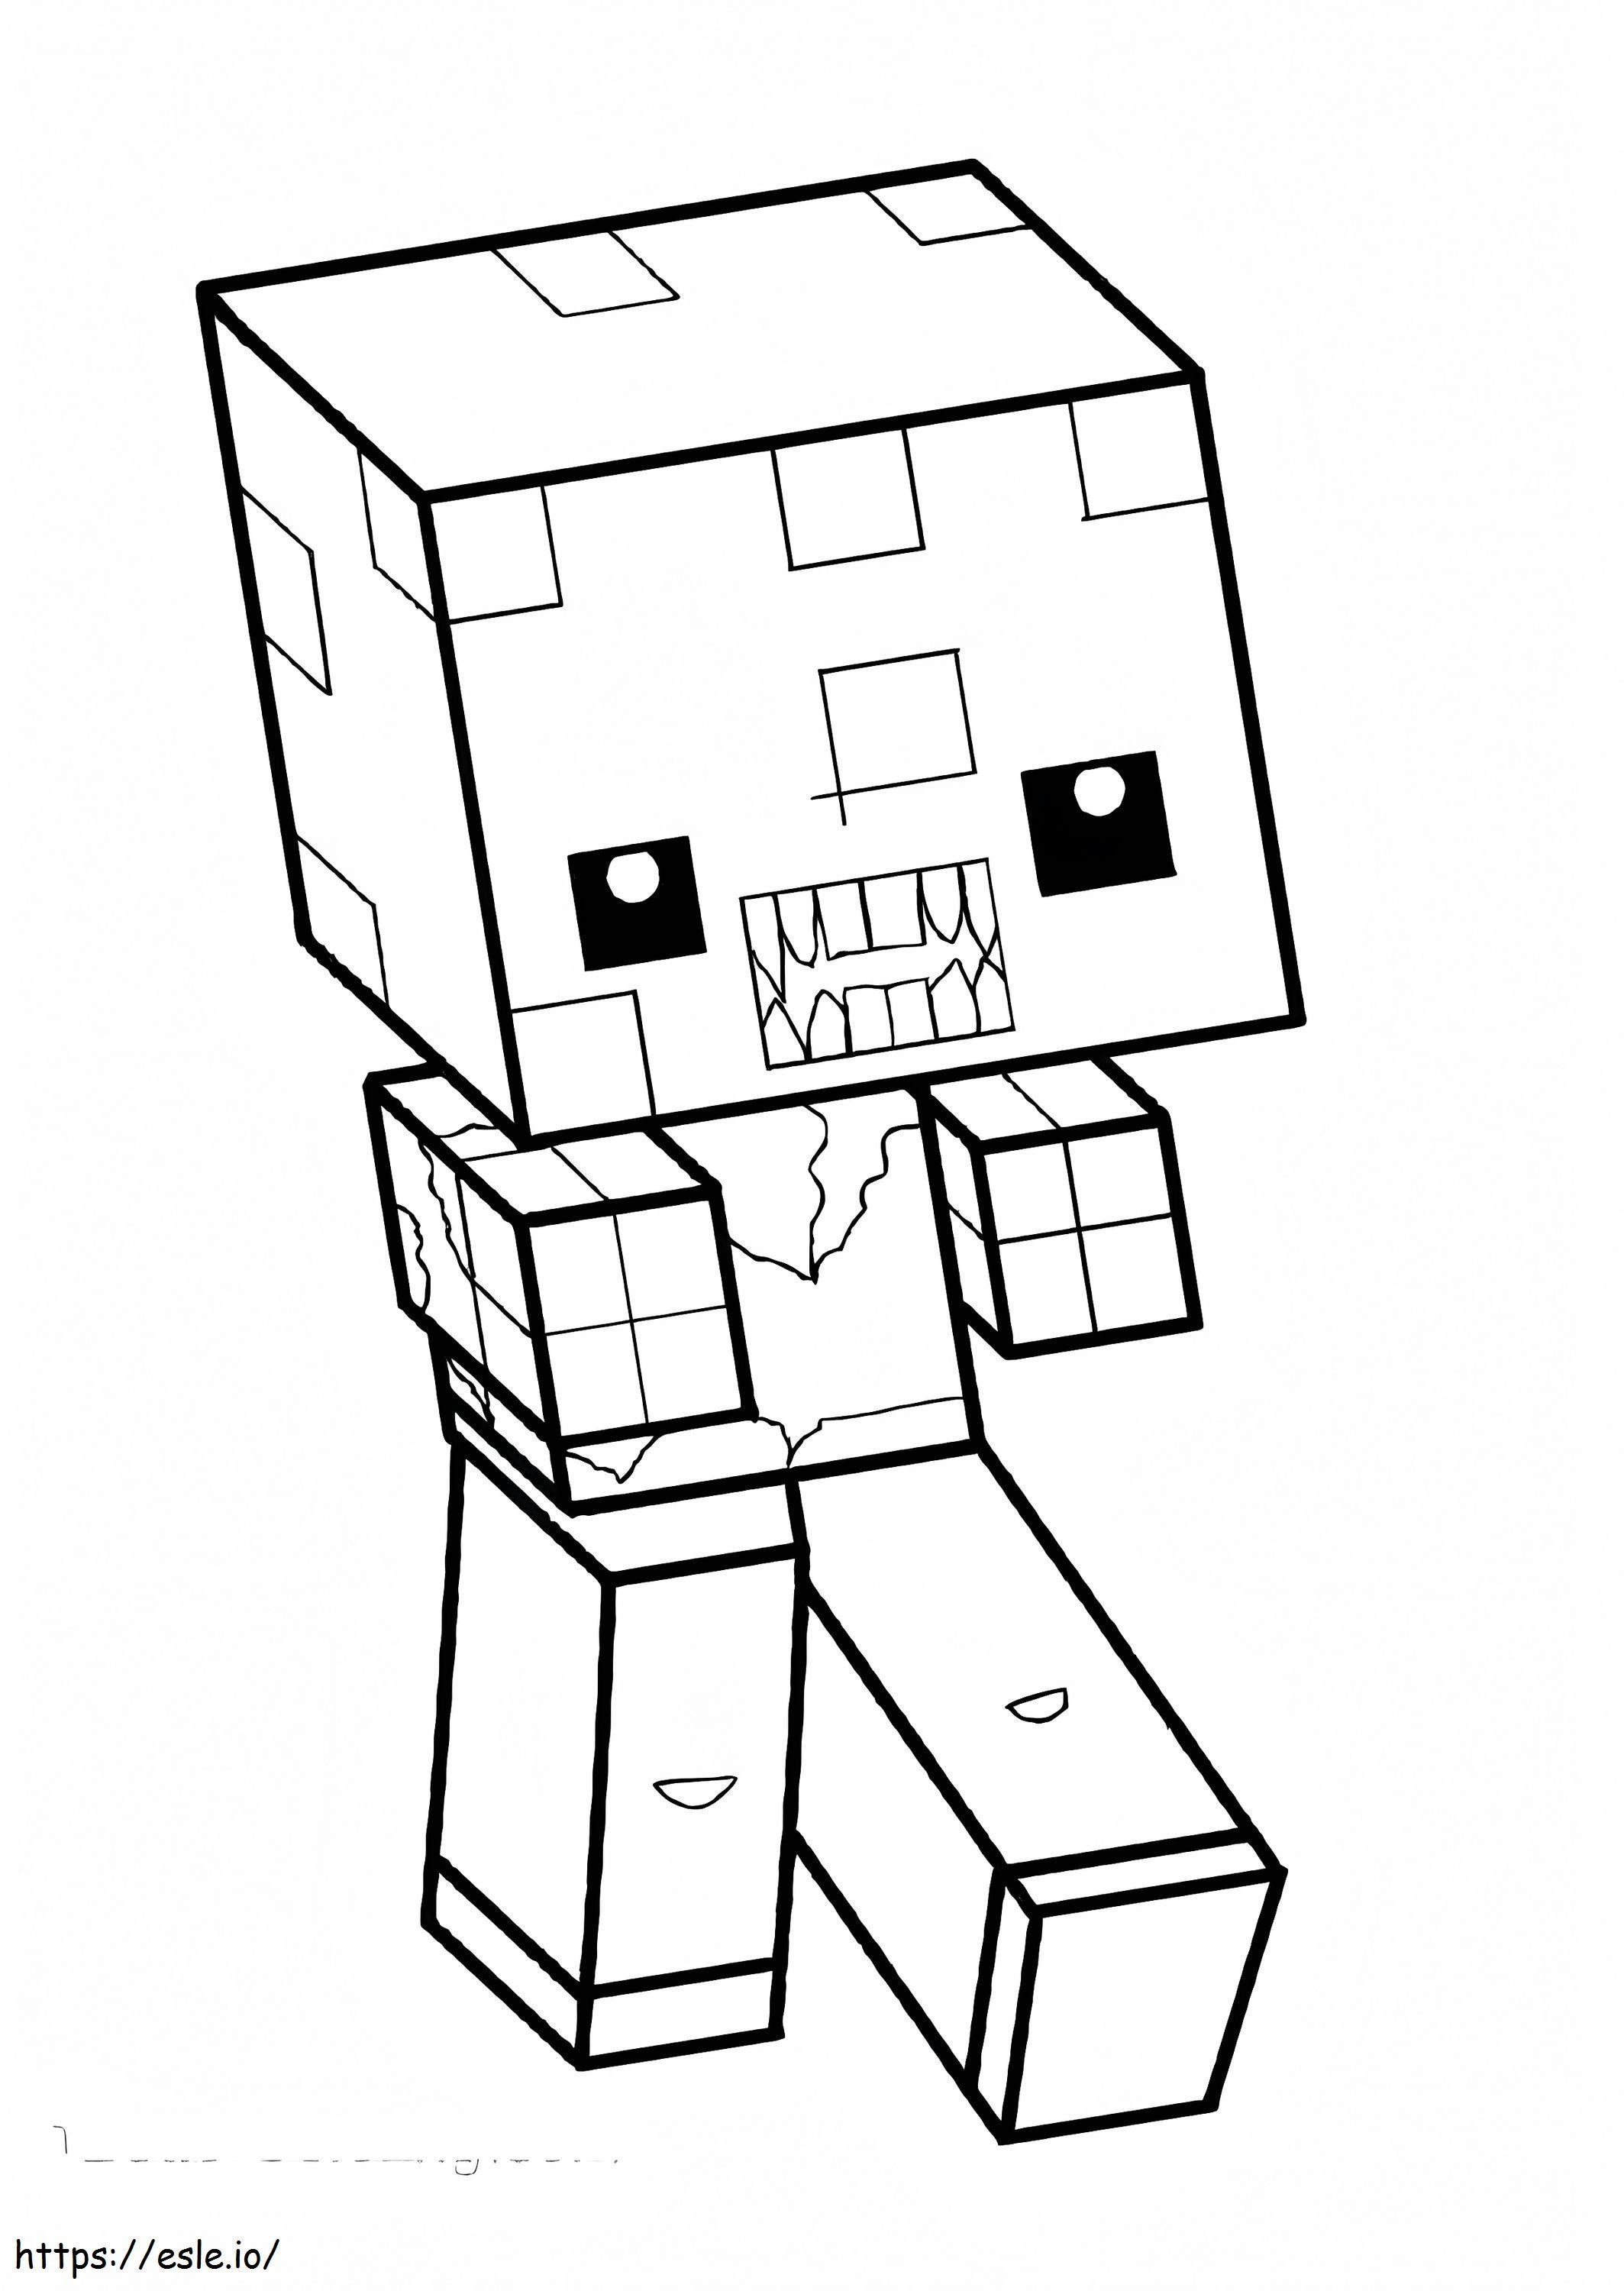 Mincraft G Book Download Page Pages Zombie Free Printable This Minecraft coloring page